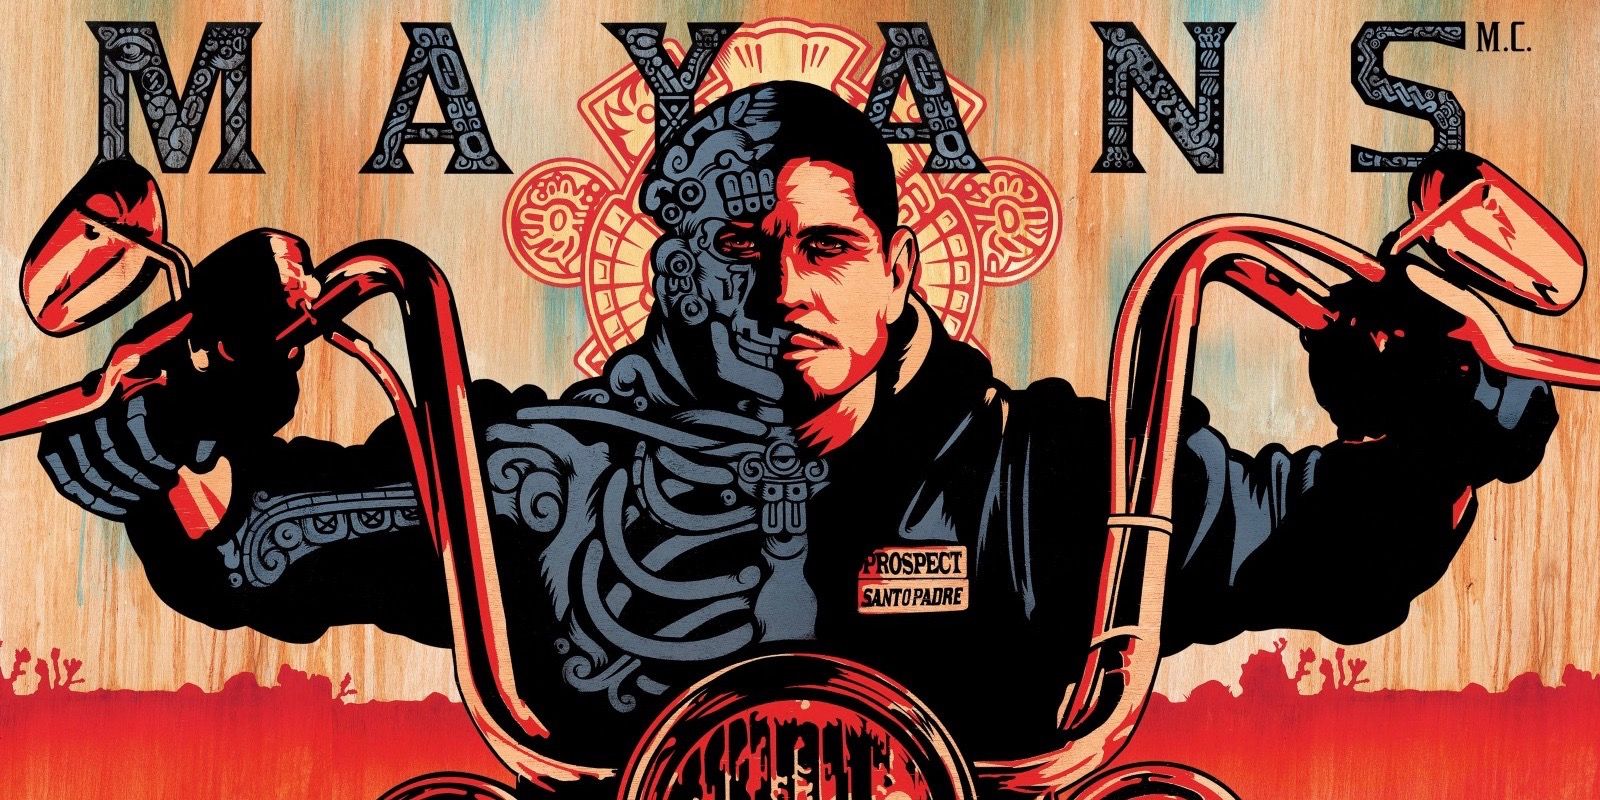 Roel Navarro's Mayans M.C. Character Explained (& Why The Season 4 Premiere Was Dedicated To Him)